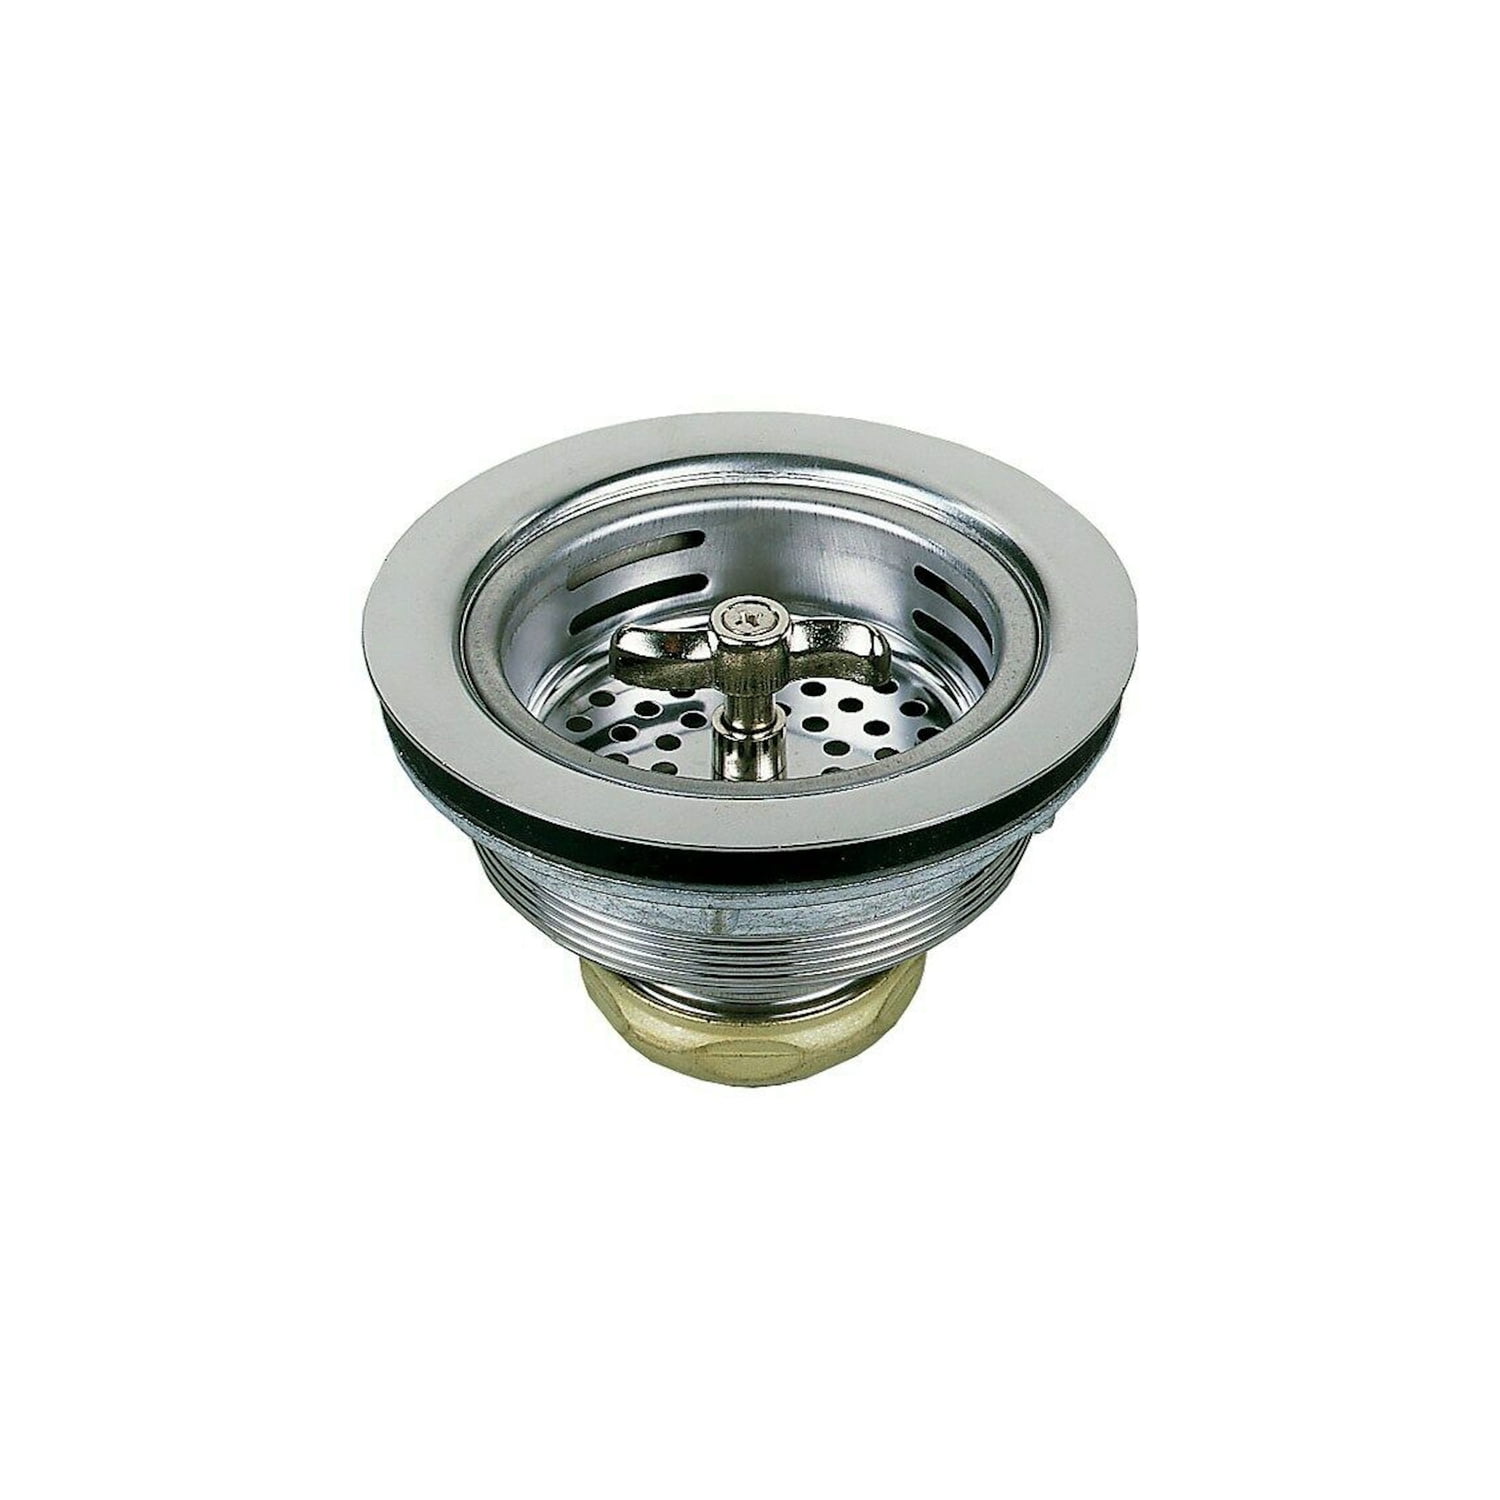 Stainless Steel Drain Assembly With With Strainer Basket 3-1/2 Inch Everflow 7516 Kitchen Sink Single, and Water Stopper